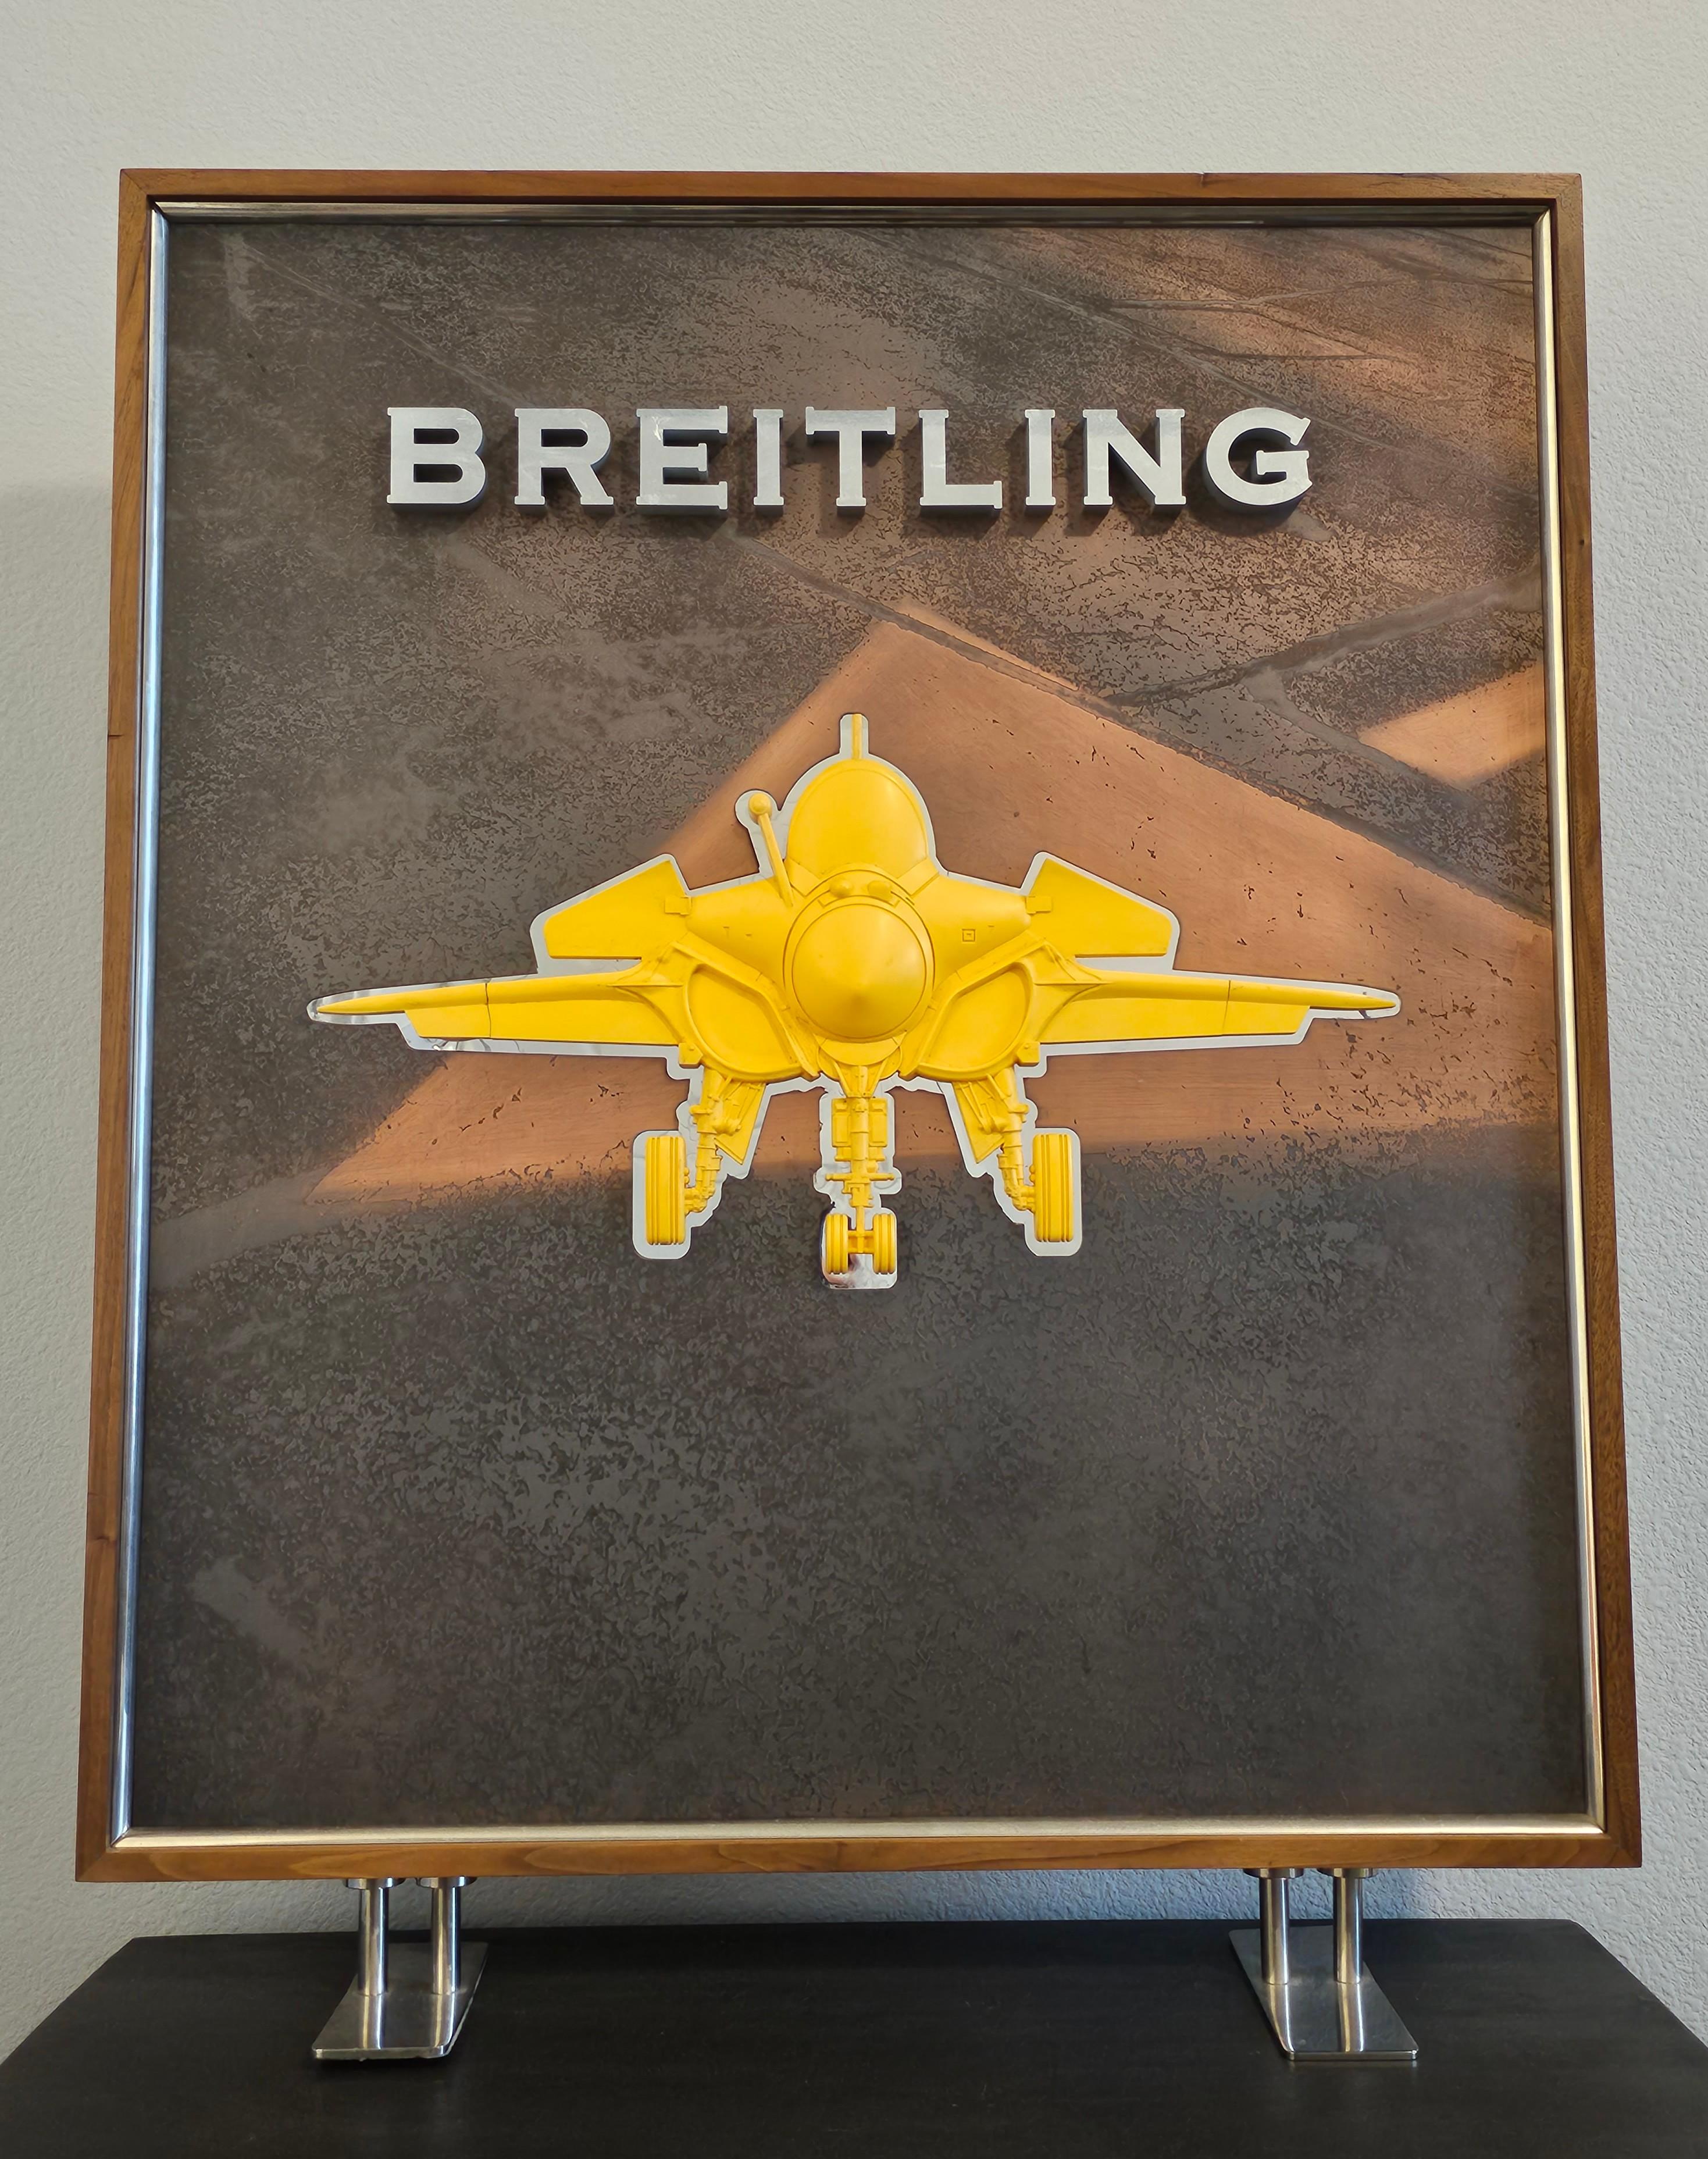 Breitling Retail Store Display Advertising Sign  For Sale 5